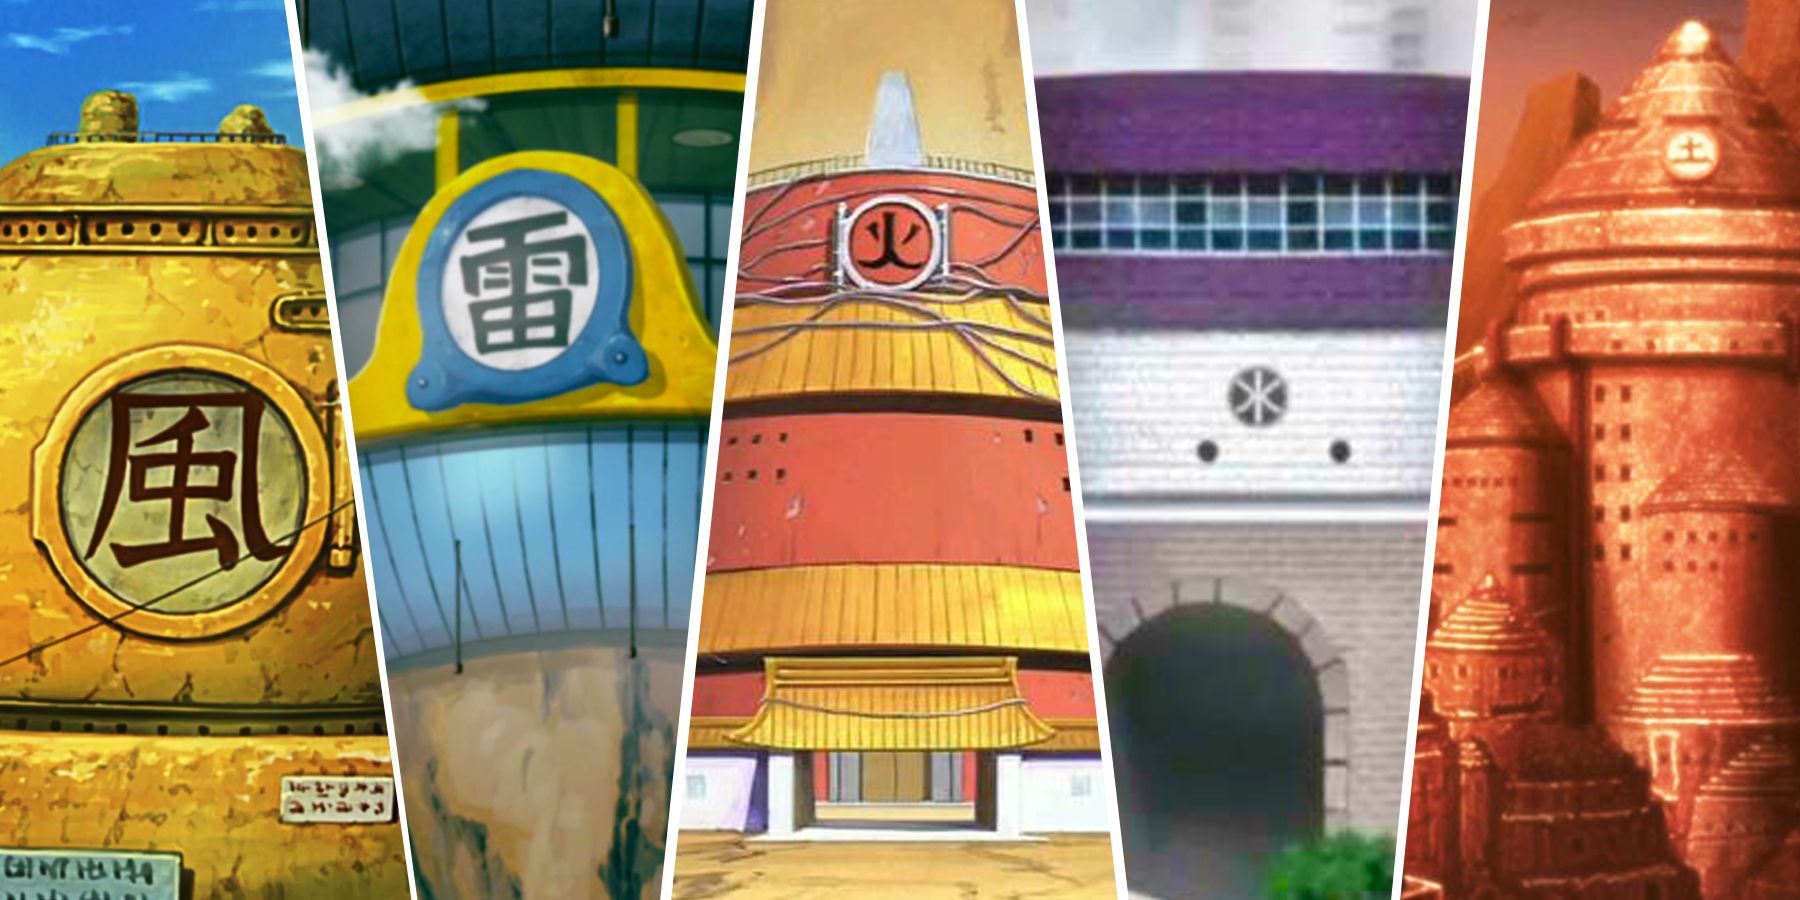 Konoha [Hidden Village of the Leaf in the Land of Fire]